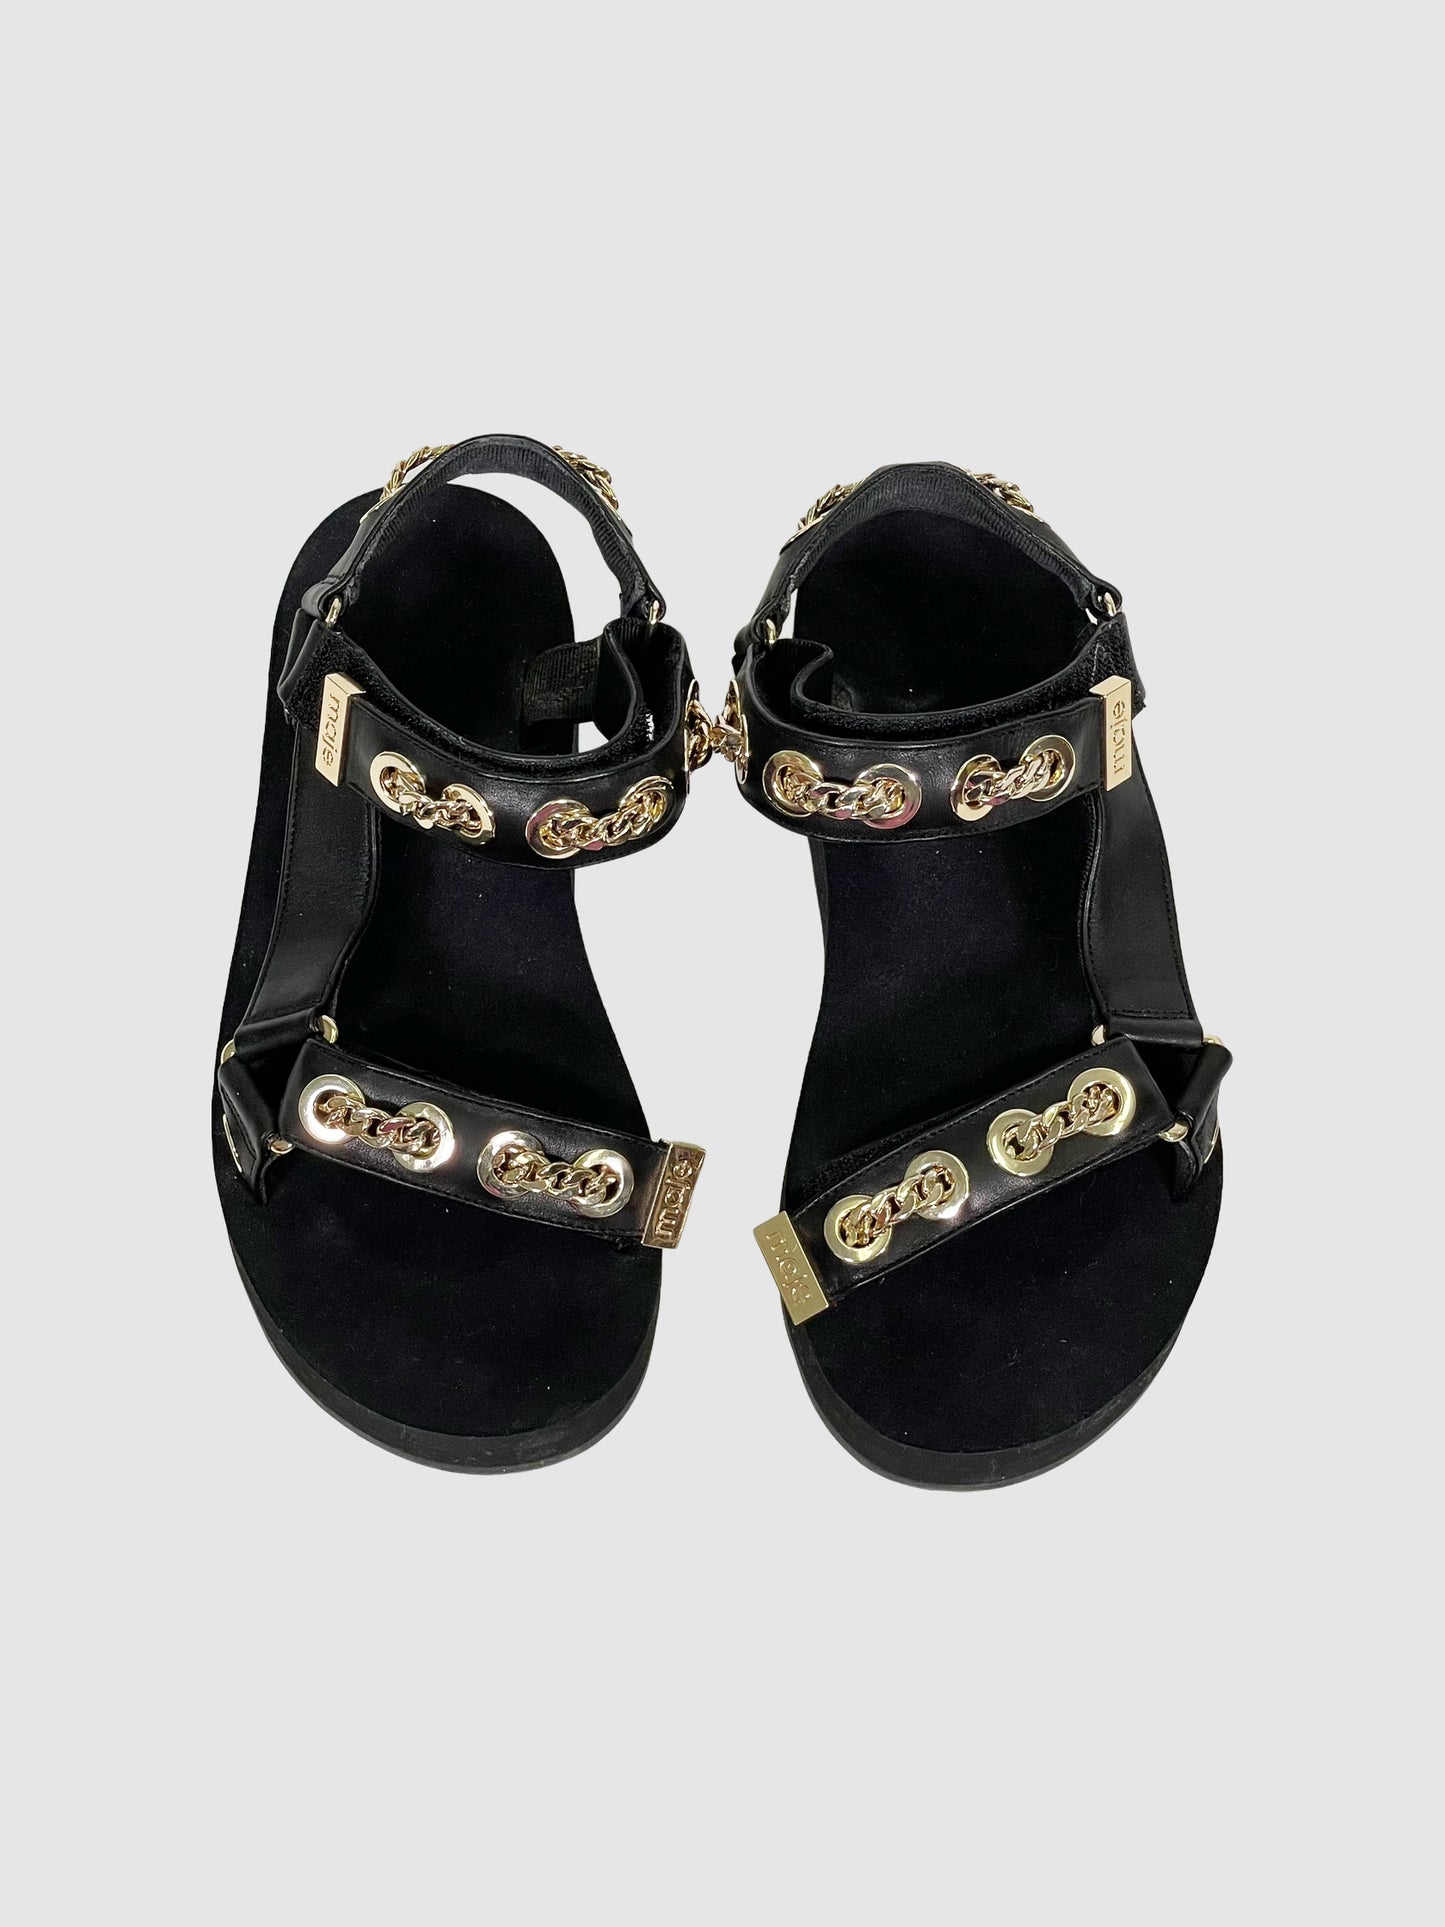 Maje Leather Chain Accents Sandals - Size 38